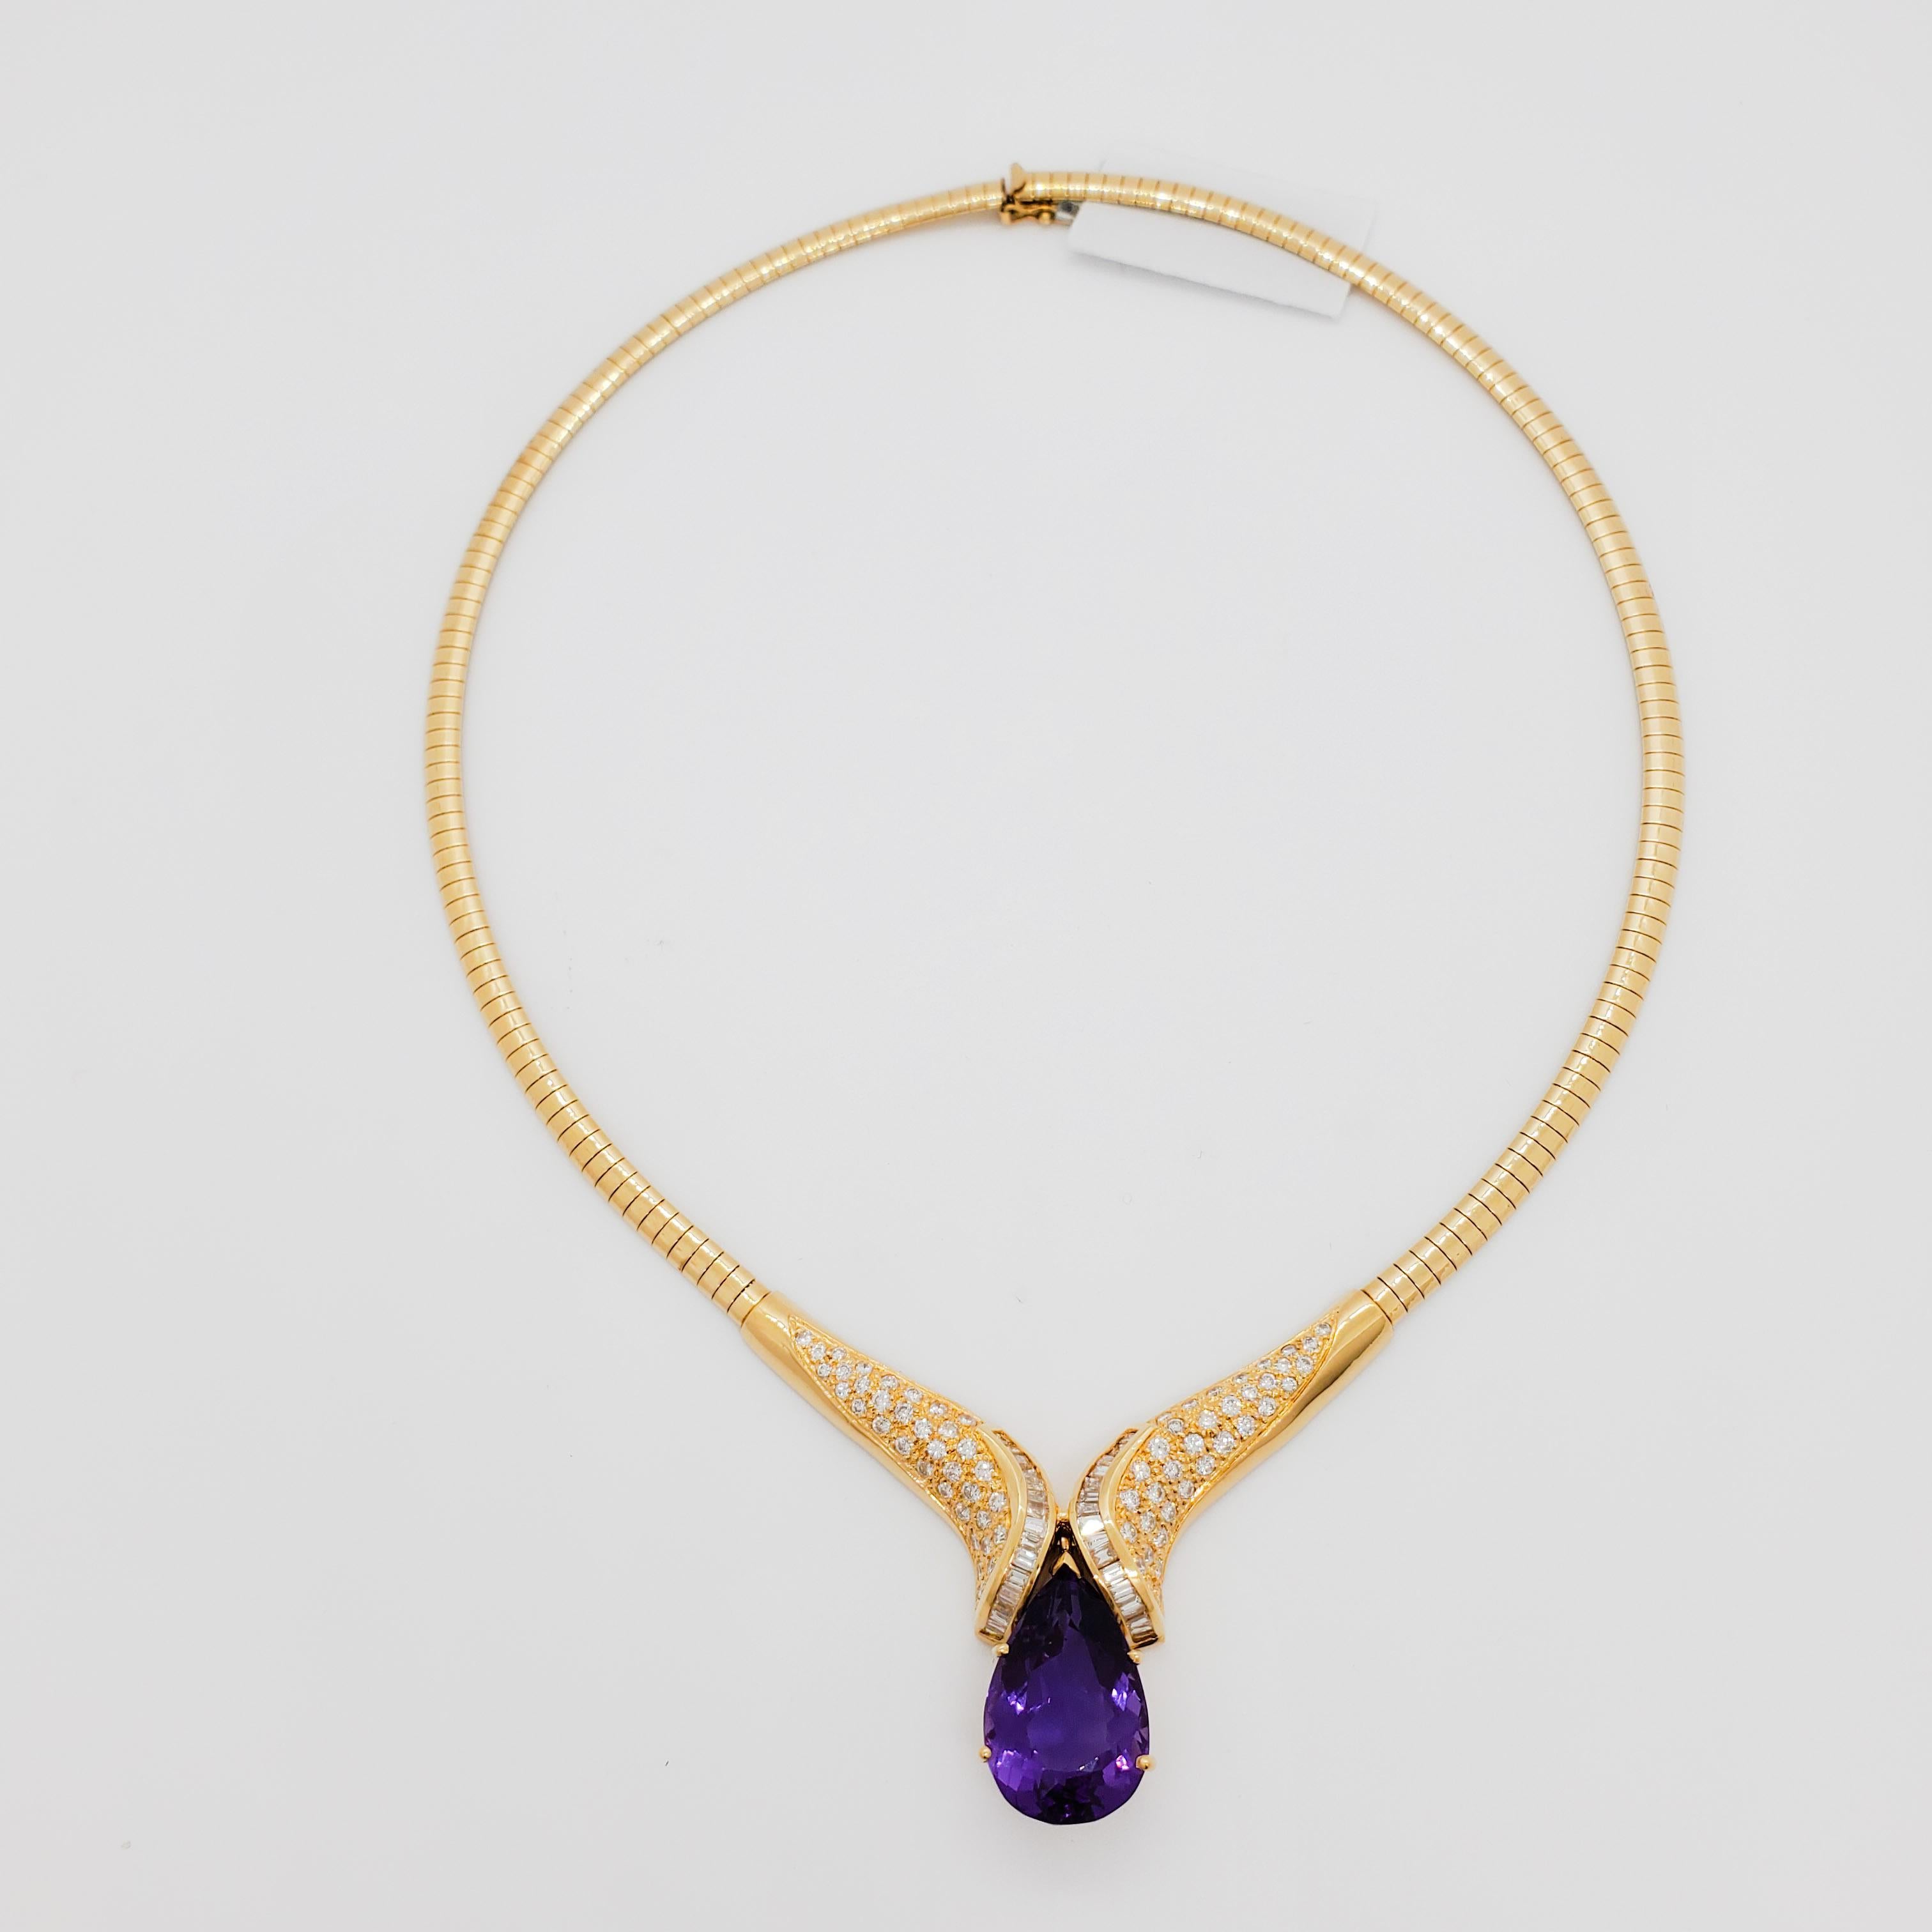 Gorgeous 15.00 ct. amethyst pear shape with 3.10 ct. good quality white diamond rounds and baguettes.  Handmade in 14k yellow gold with an Omega style chain.